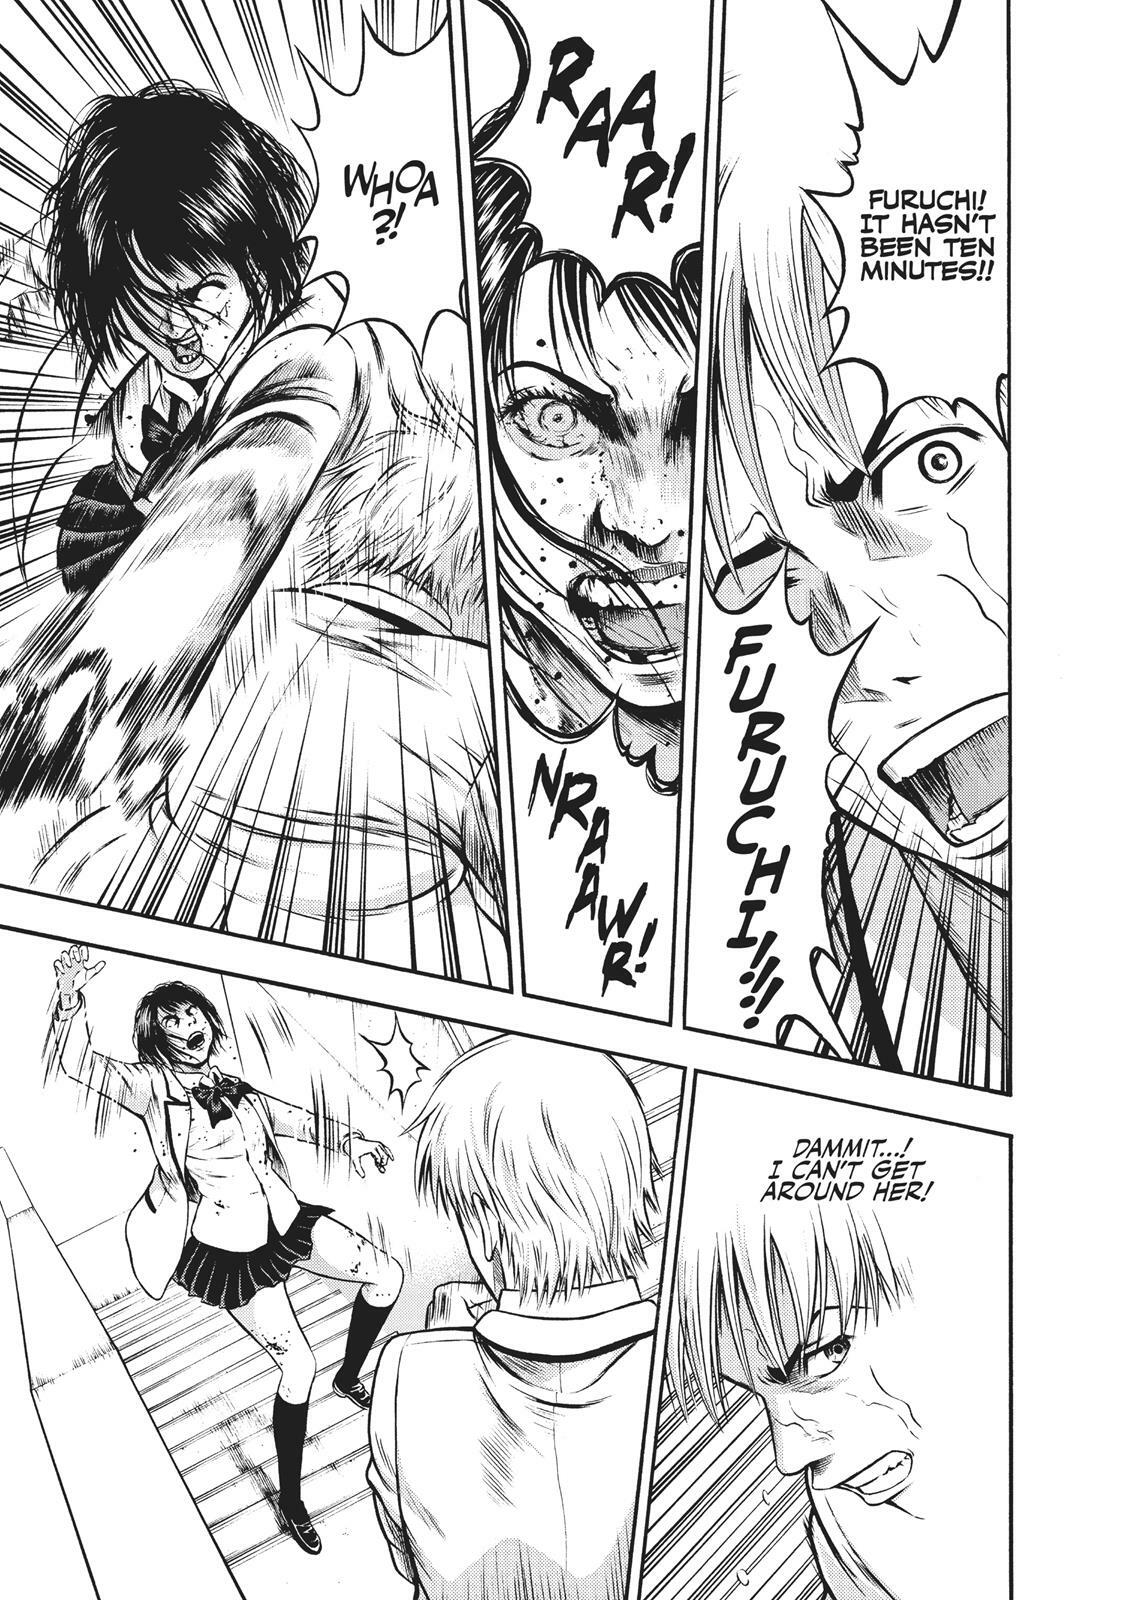 Read Igai - The Play Dead/alive Chapter 4 on Mangakakalot